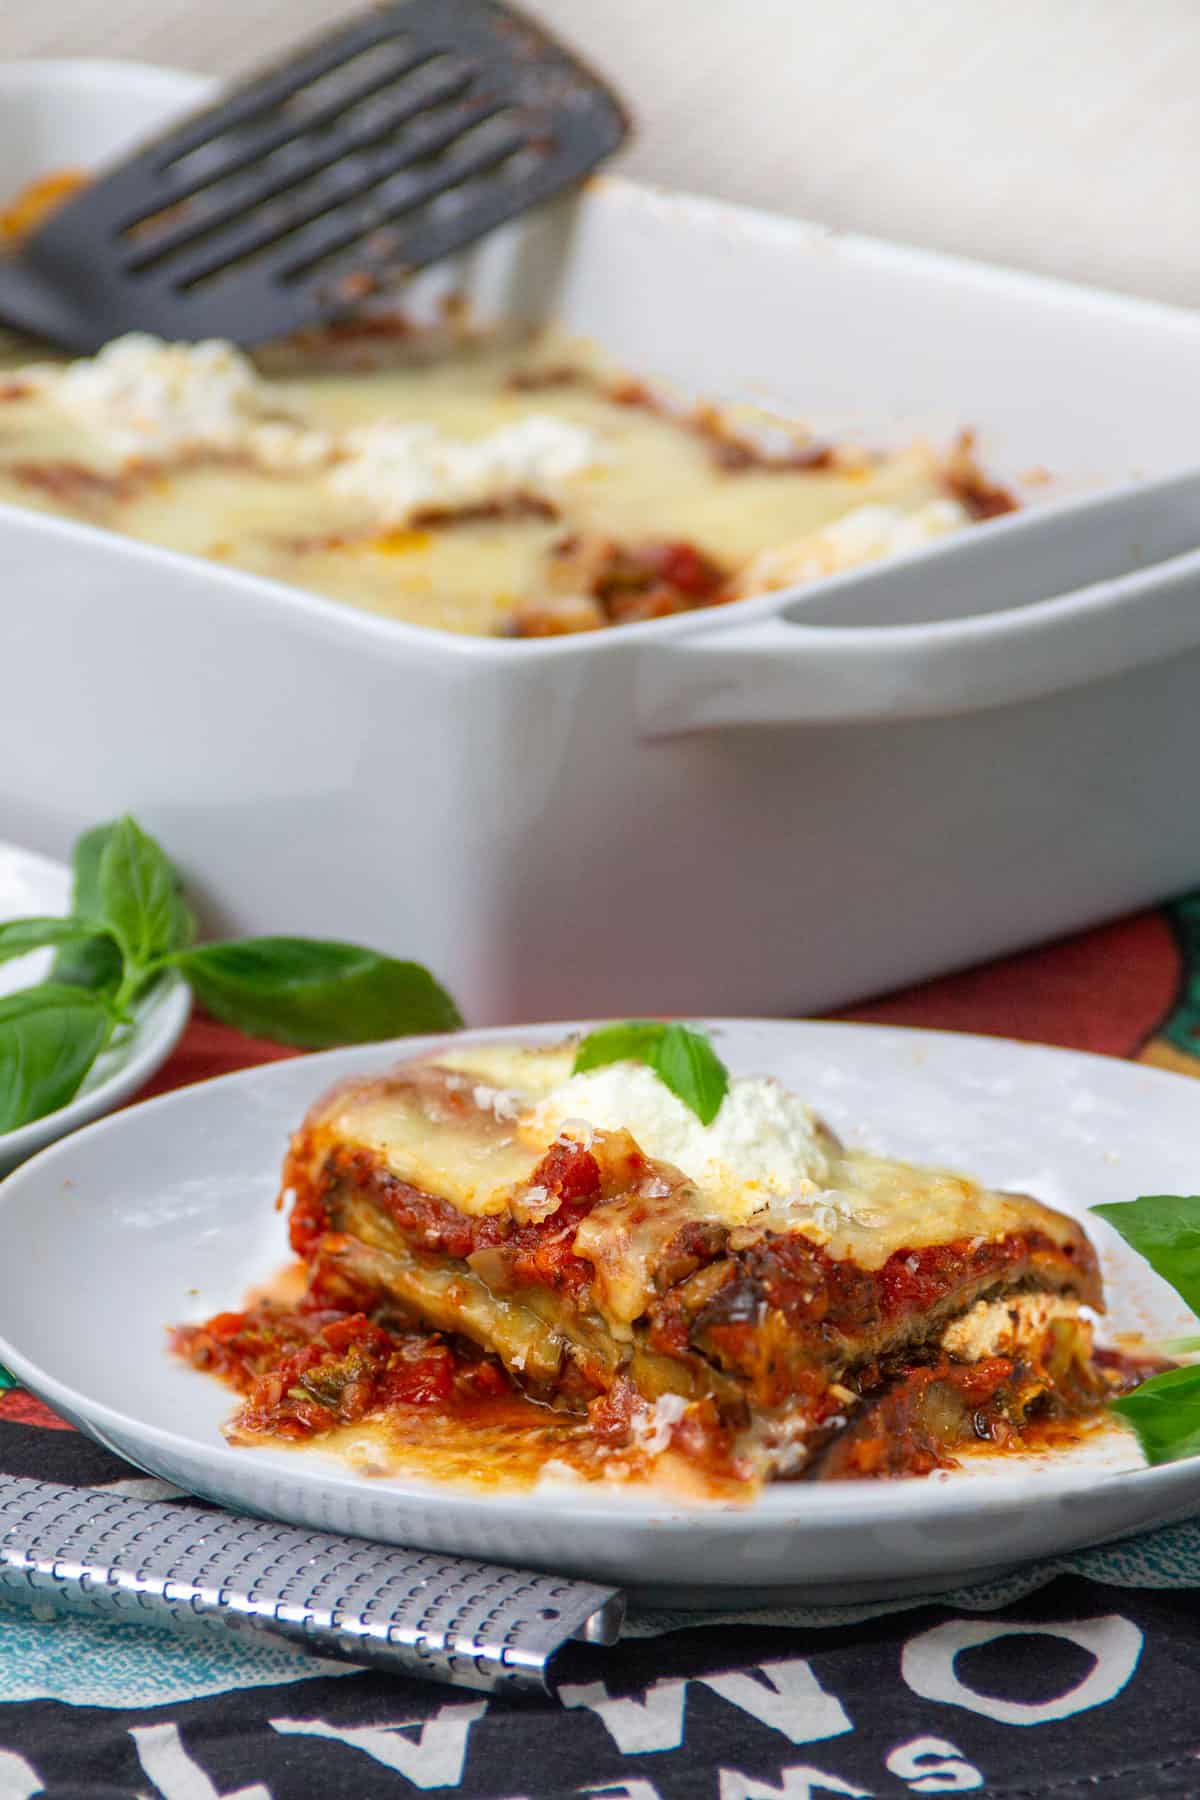 a slice of saucy cheesy eggplant lasagna on a plate with the casserole in the background